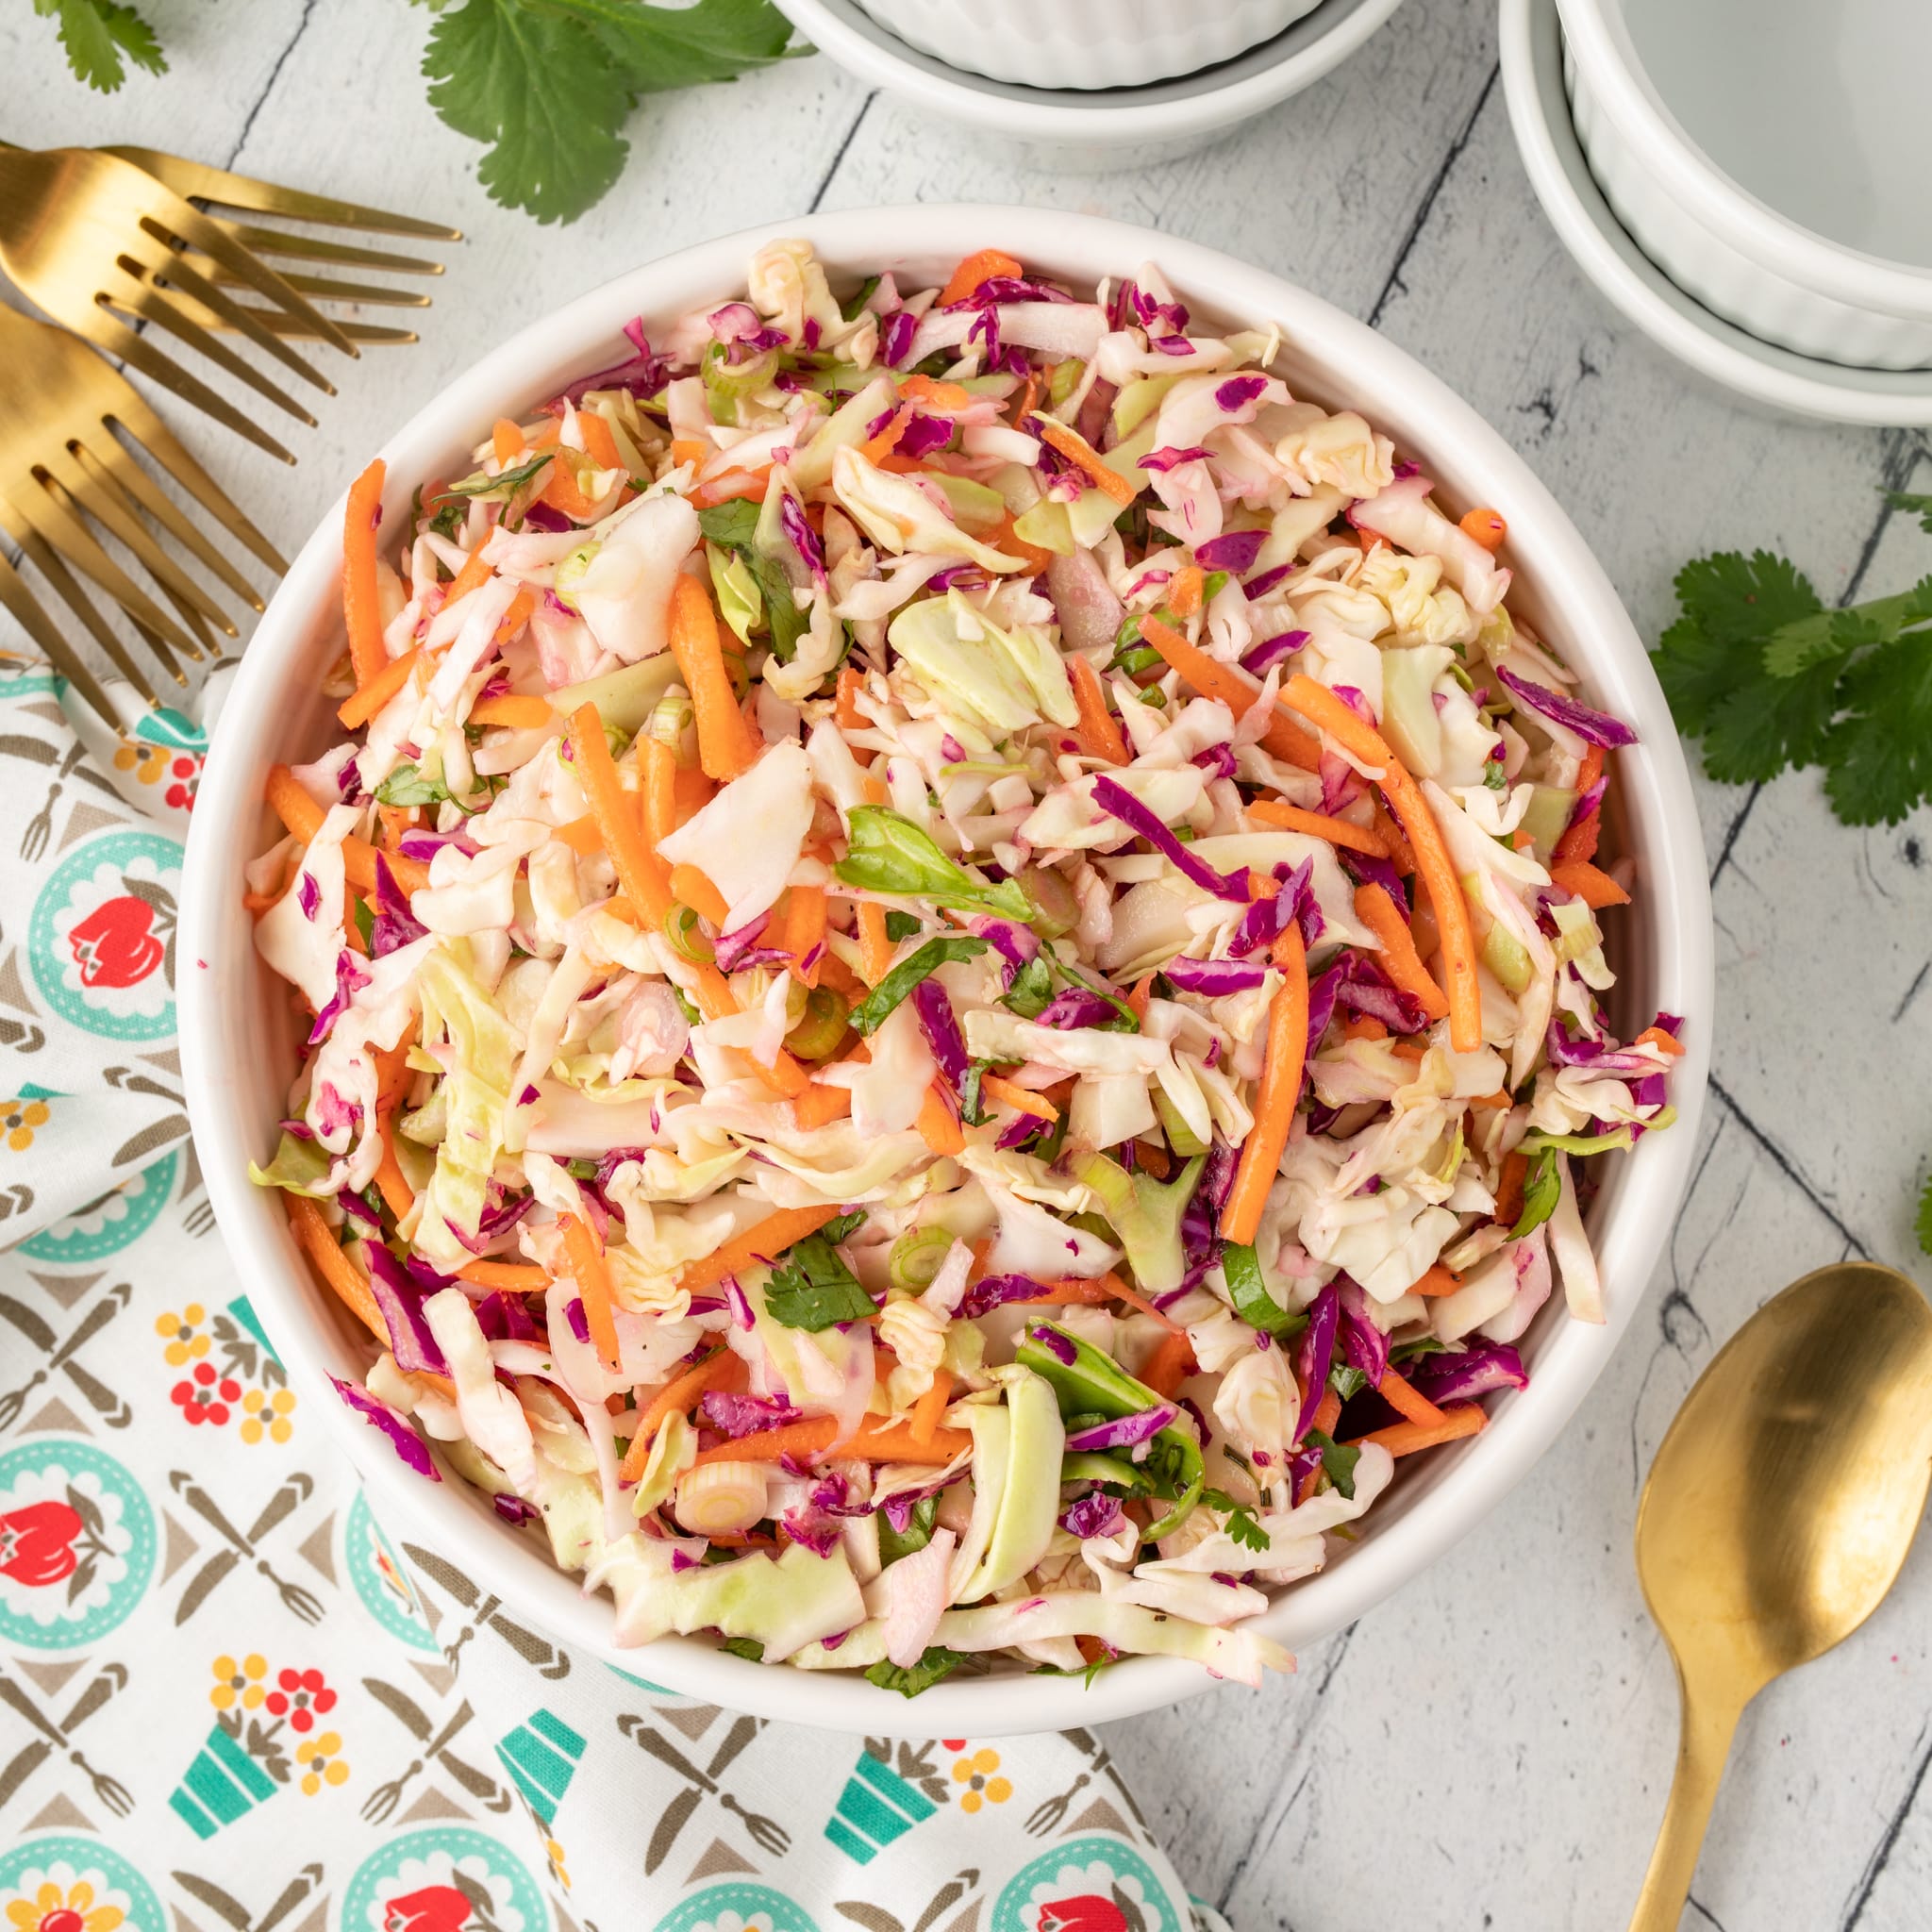 Coleslaw in a white bowl with gold spoons.